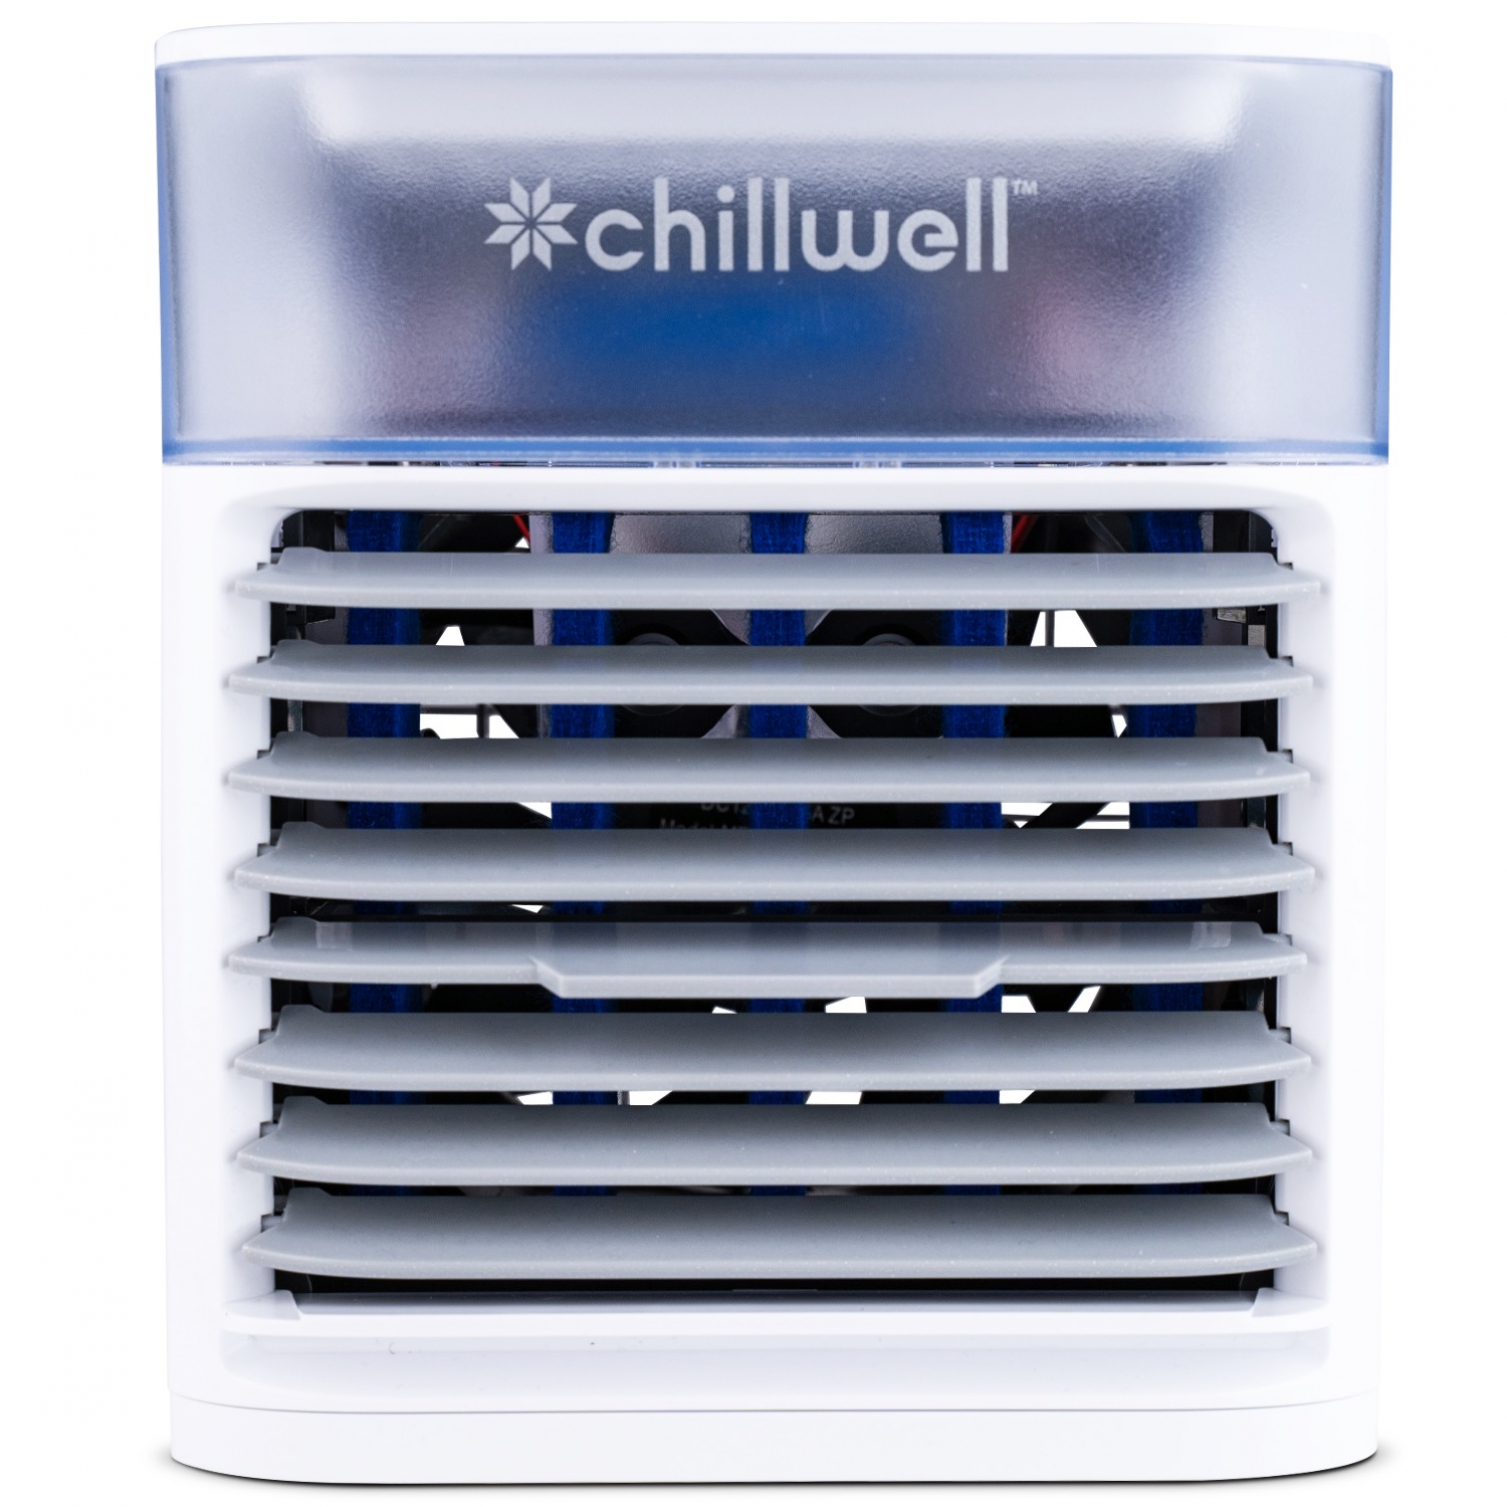 Is Chillwell AC A Humidifier